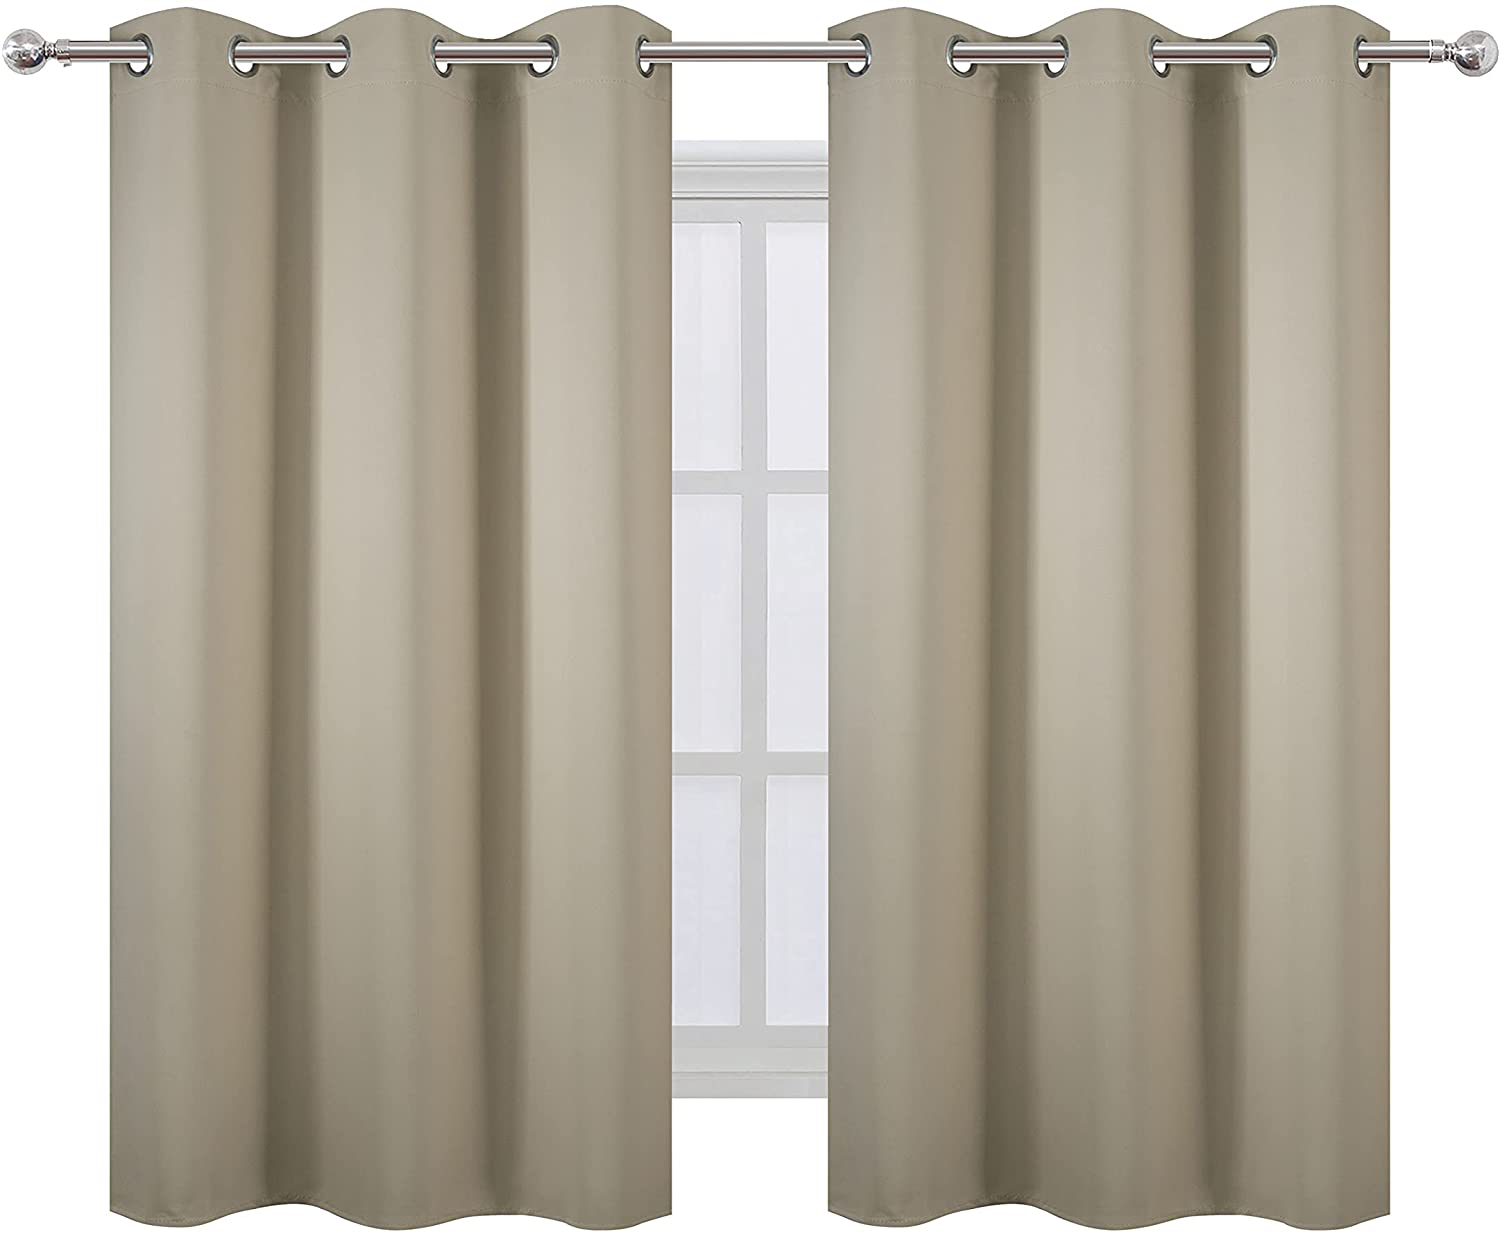 LEMOMO Chocolate Brown Thermal Blackout Curtains/38 x 63 Inch/Set of 2 Panels Room Darkening Curtains for Bedroom